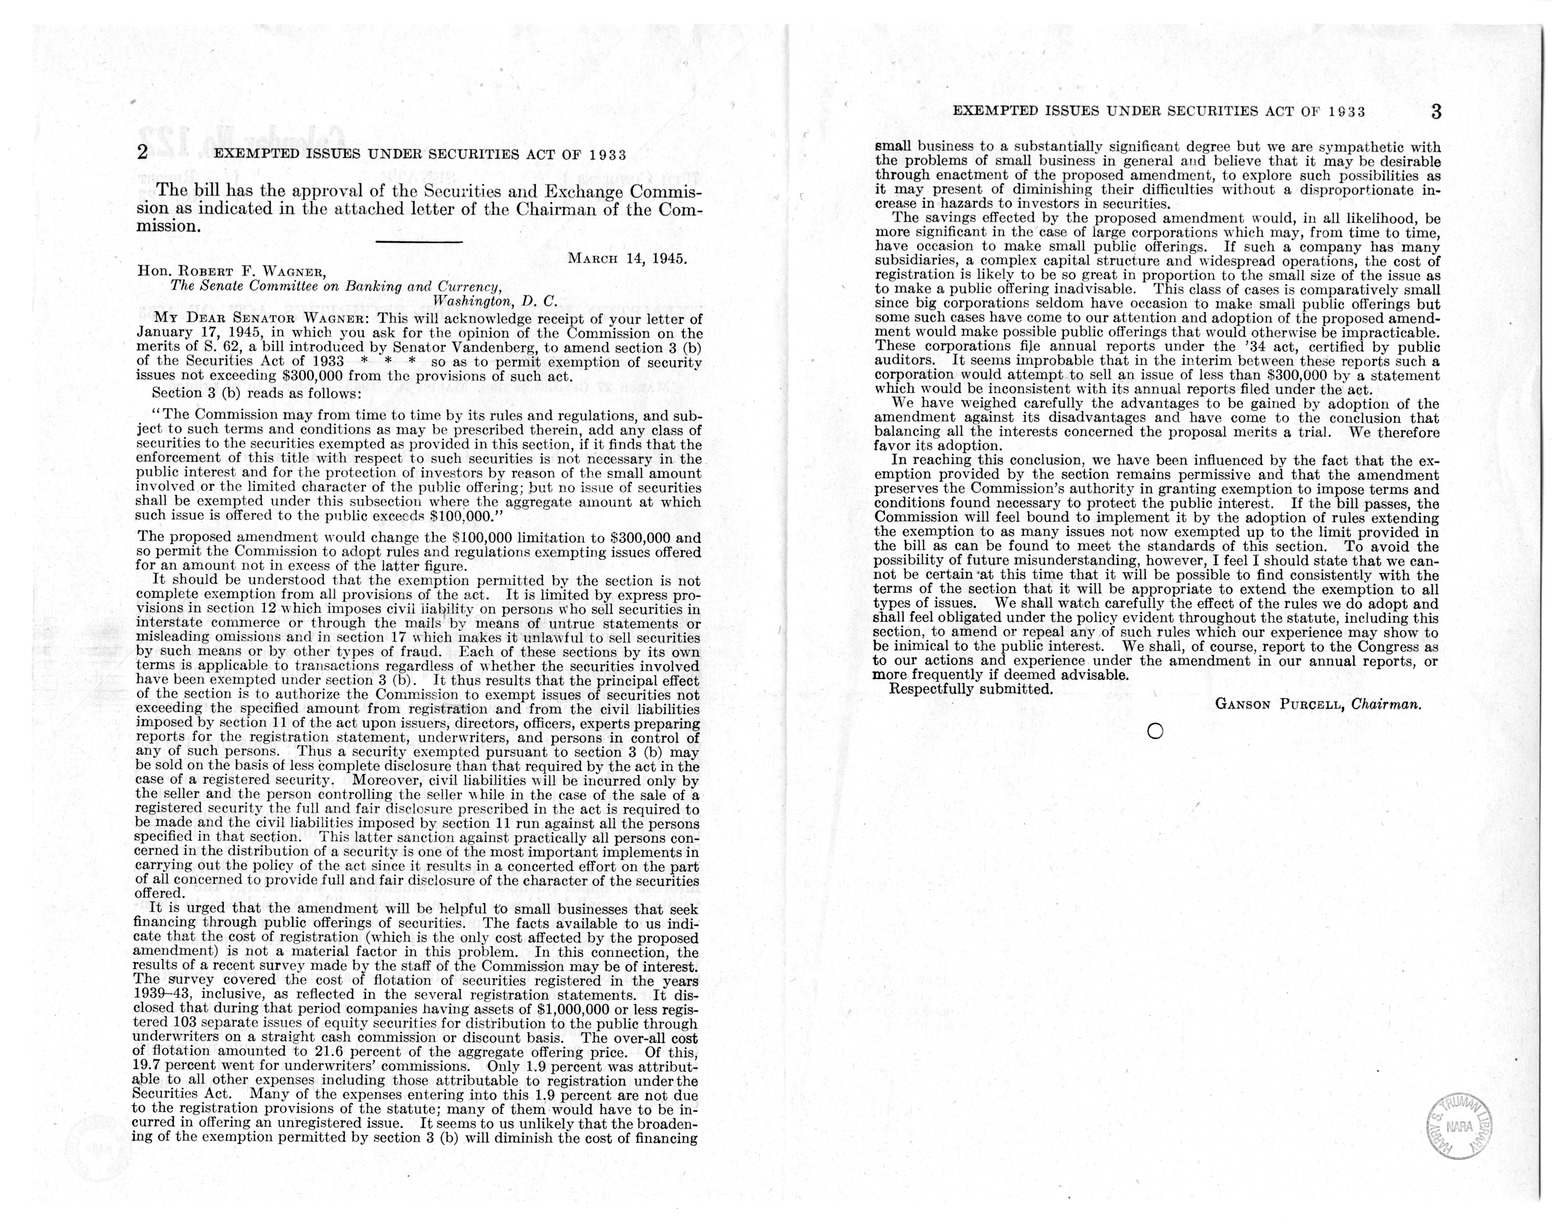 Memorandum from Harold D. Smith to M.C. Latta, S. 62, To Amend Sections 3(b) of the Securities Act of 1933, as Amended, with Attachments